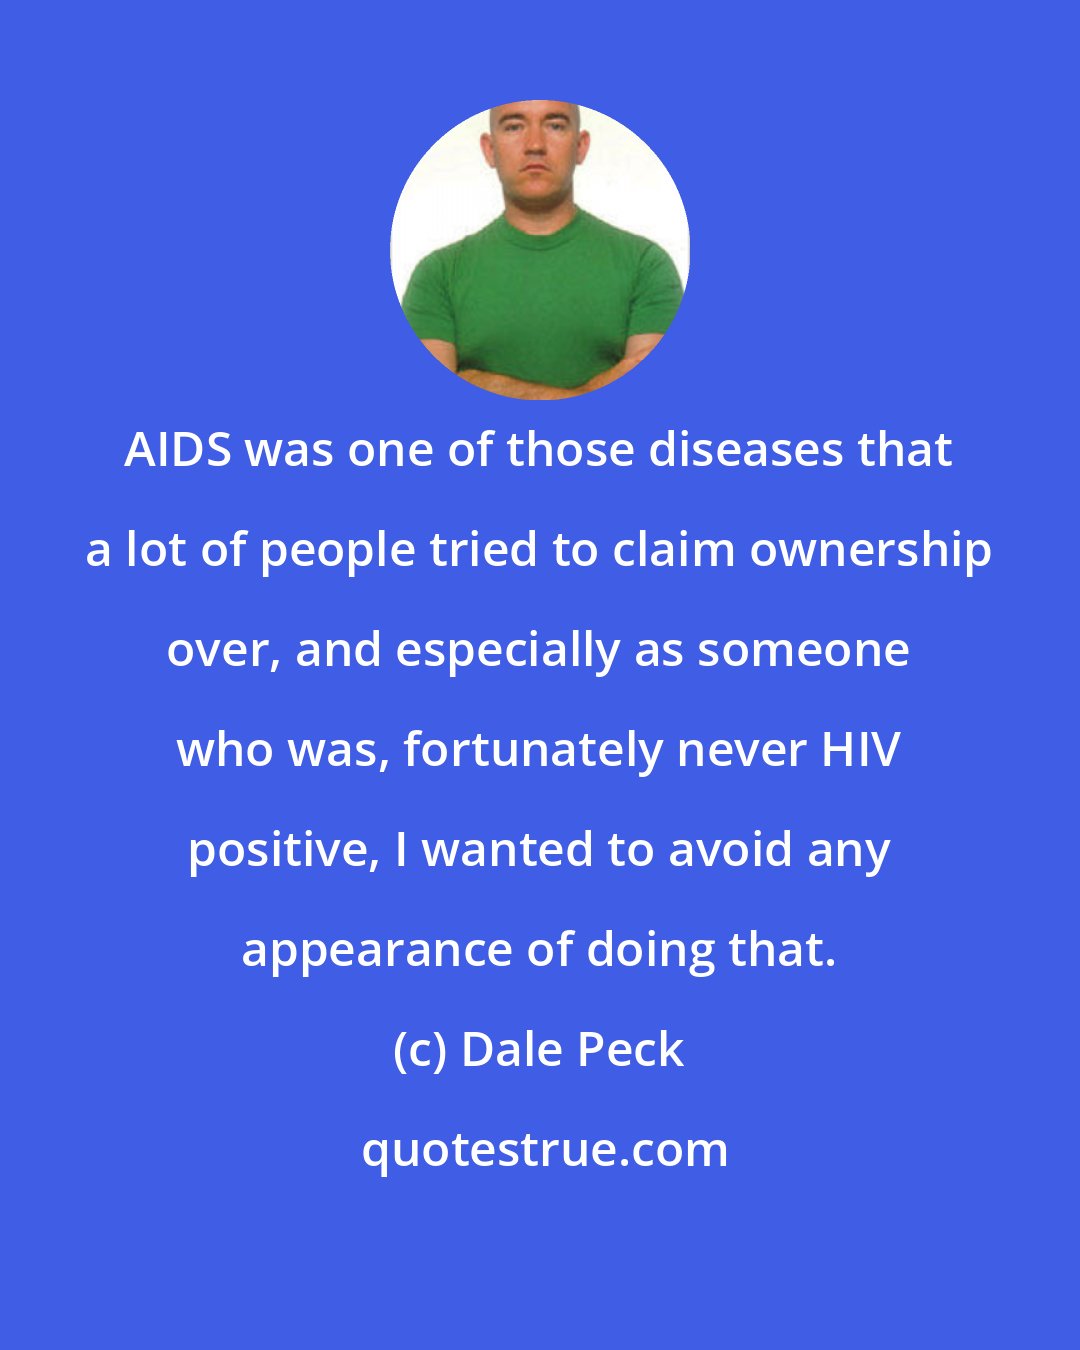 Dale Peck: AIDS was one of those diseases that a lot of people tried to claim ownership over, and especially as someone who was, fortunately never HIV positive, I wanted to avoid any appearance of doing that.